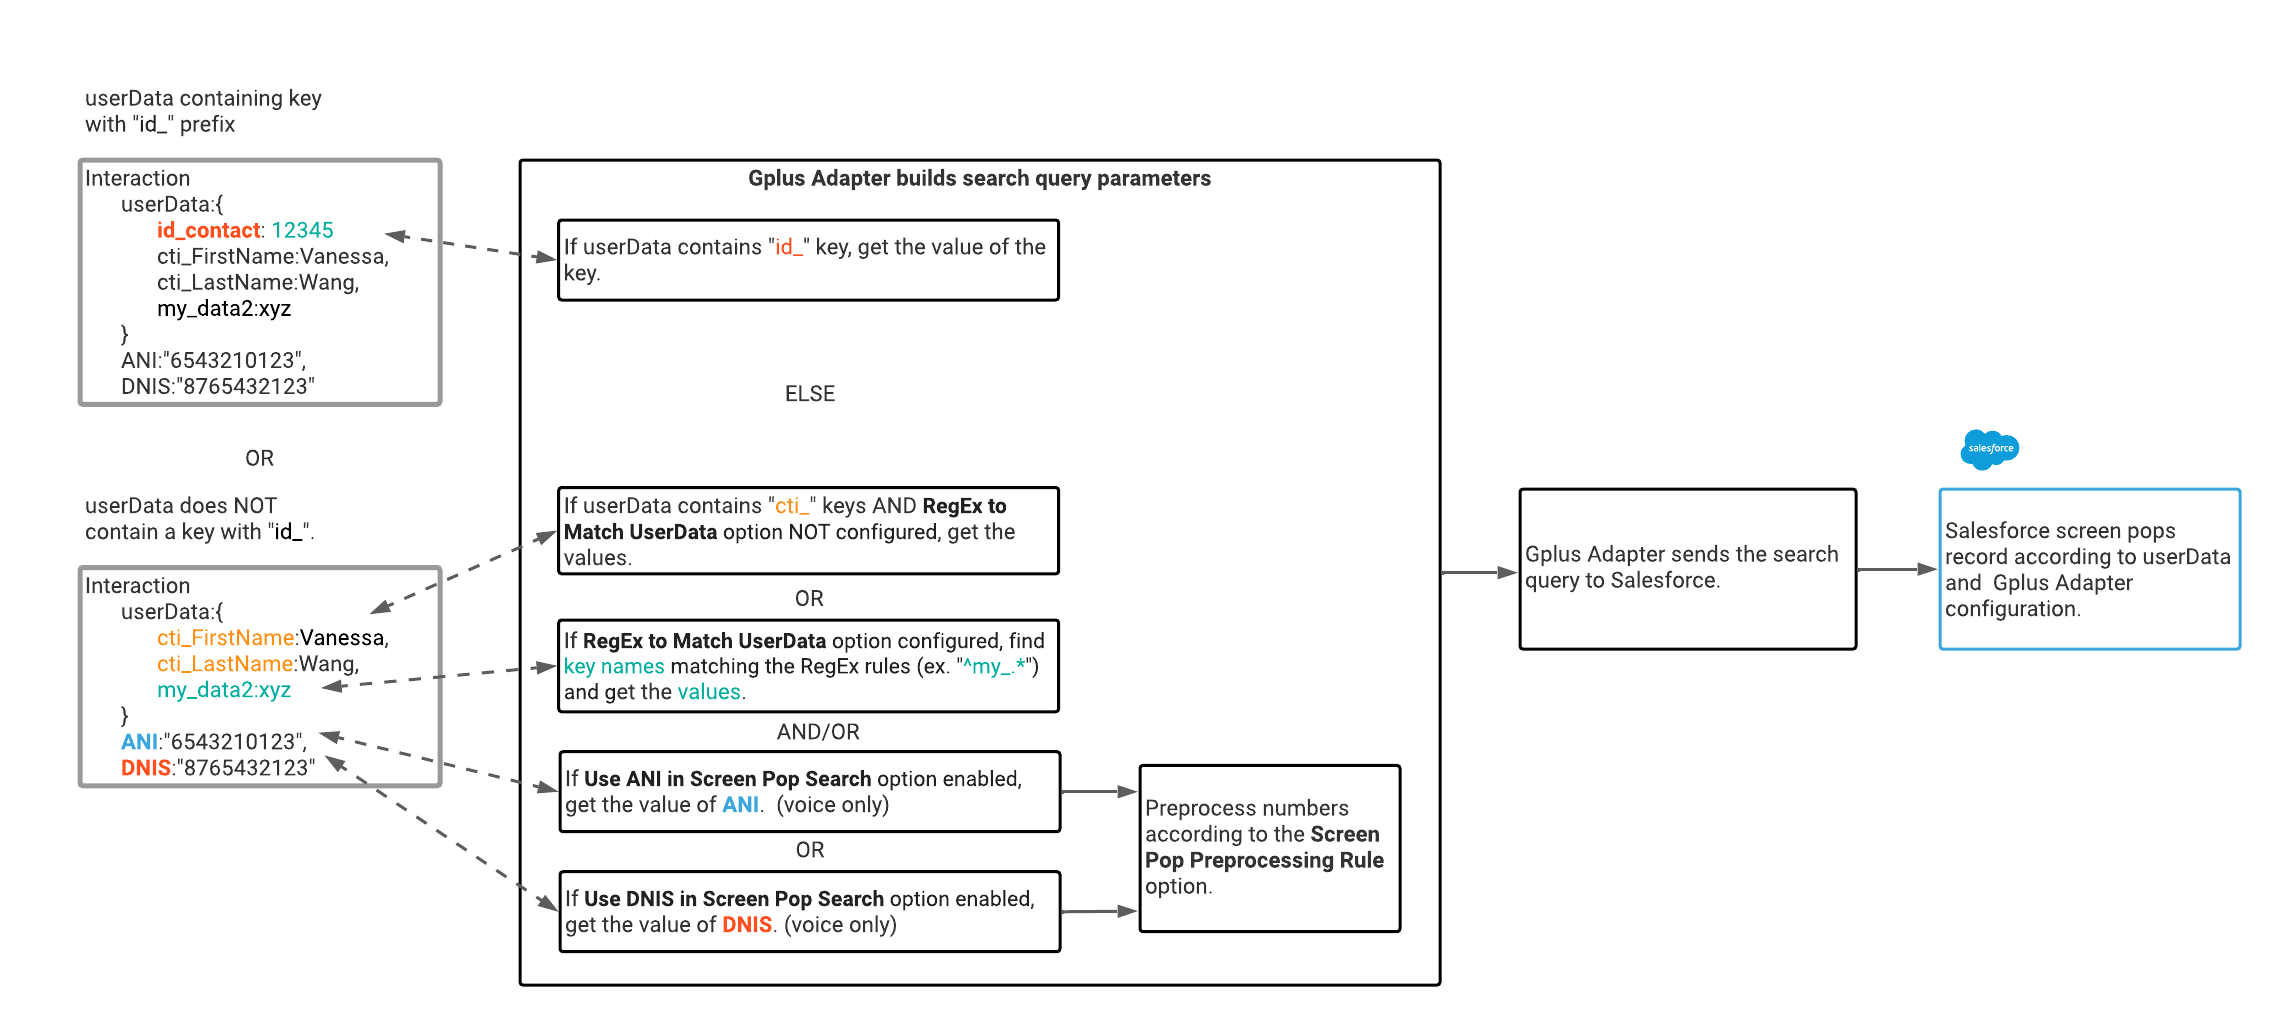 A flowchart of Gplus Adapter Screen pop logic to search for a Salesforce record based on userData.